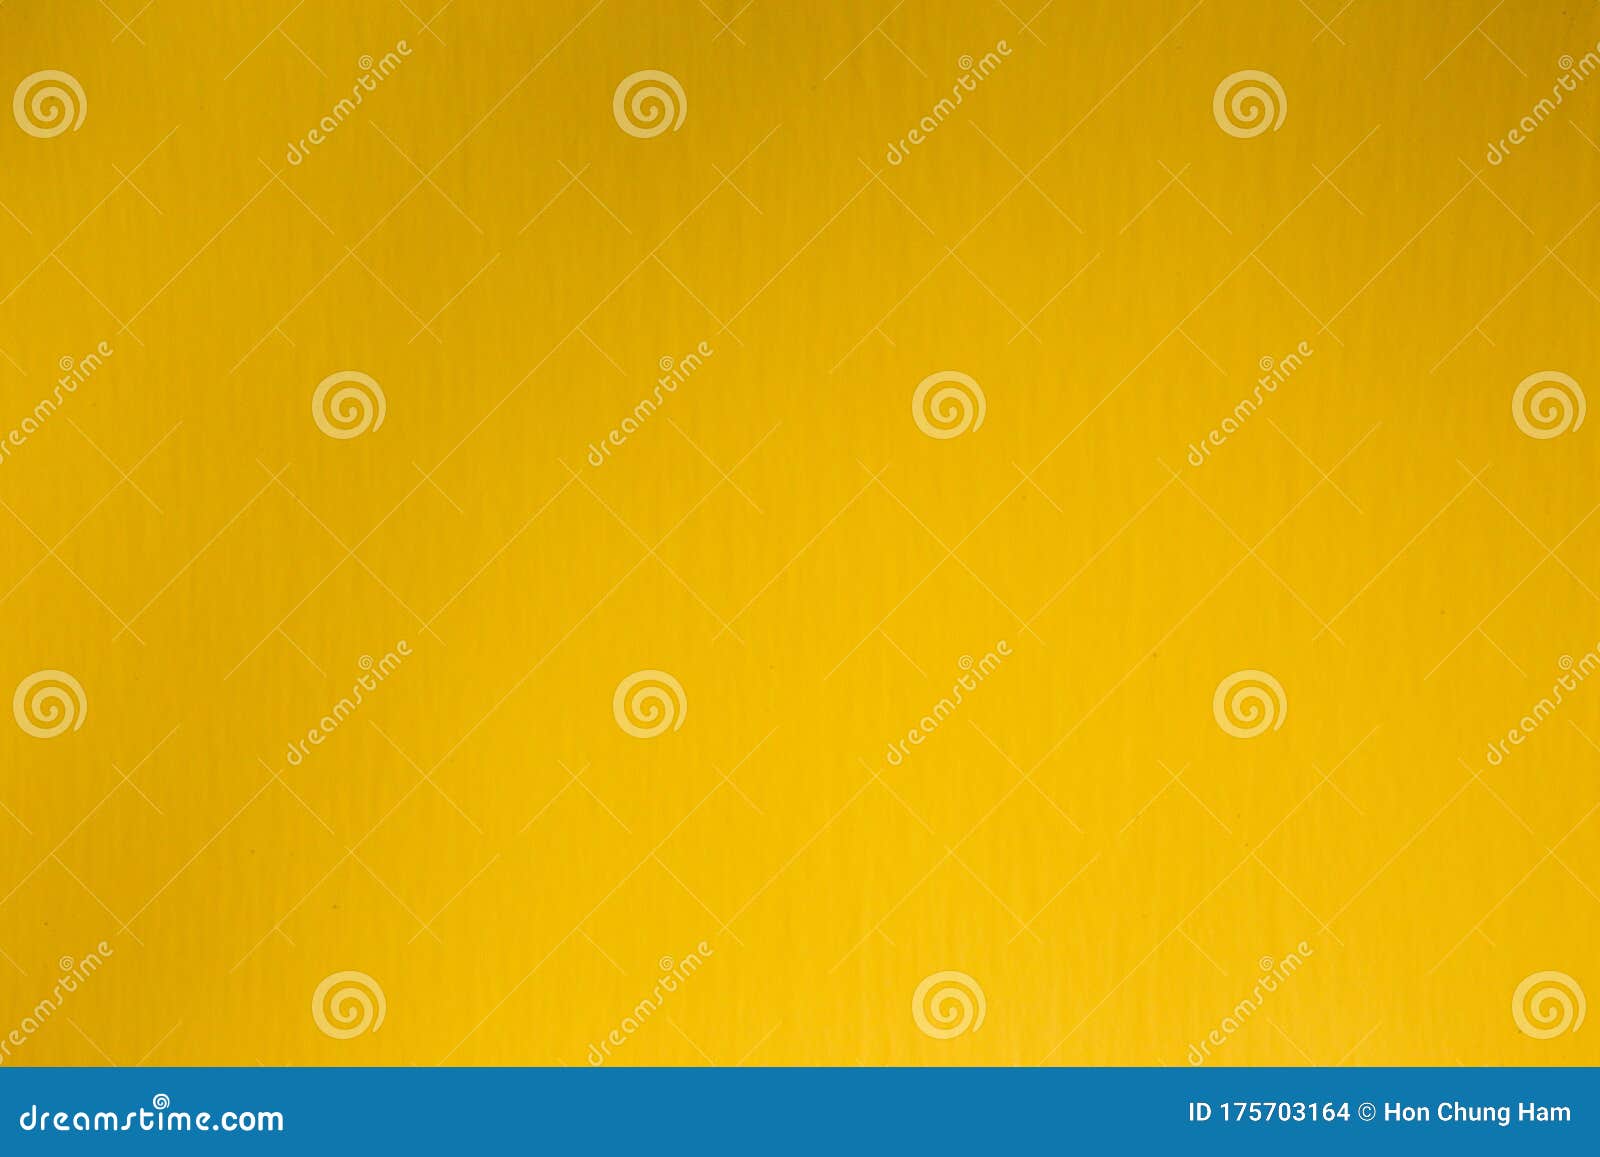 Bright Yellow Orange Gold Plain Clean Blank Background Wallpaper Color  Stock Photo - Image of homepage, graphic: 175703164